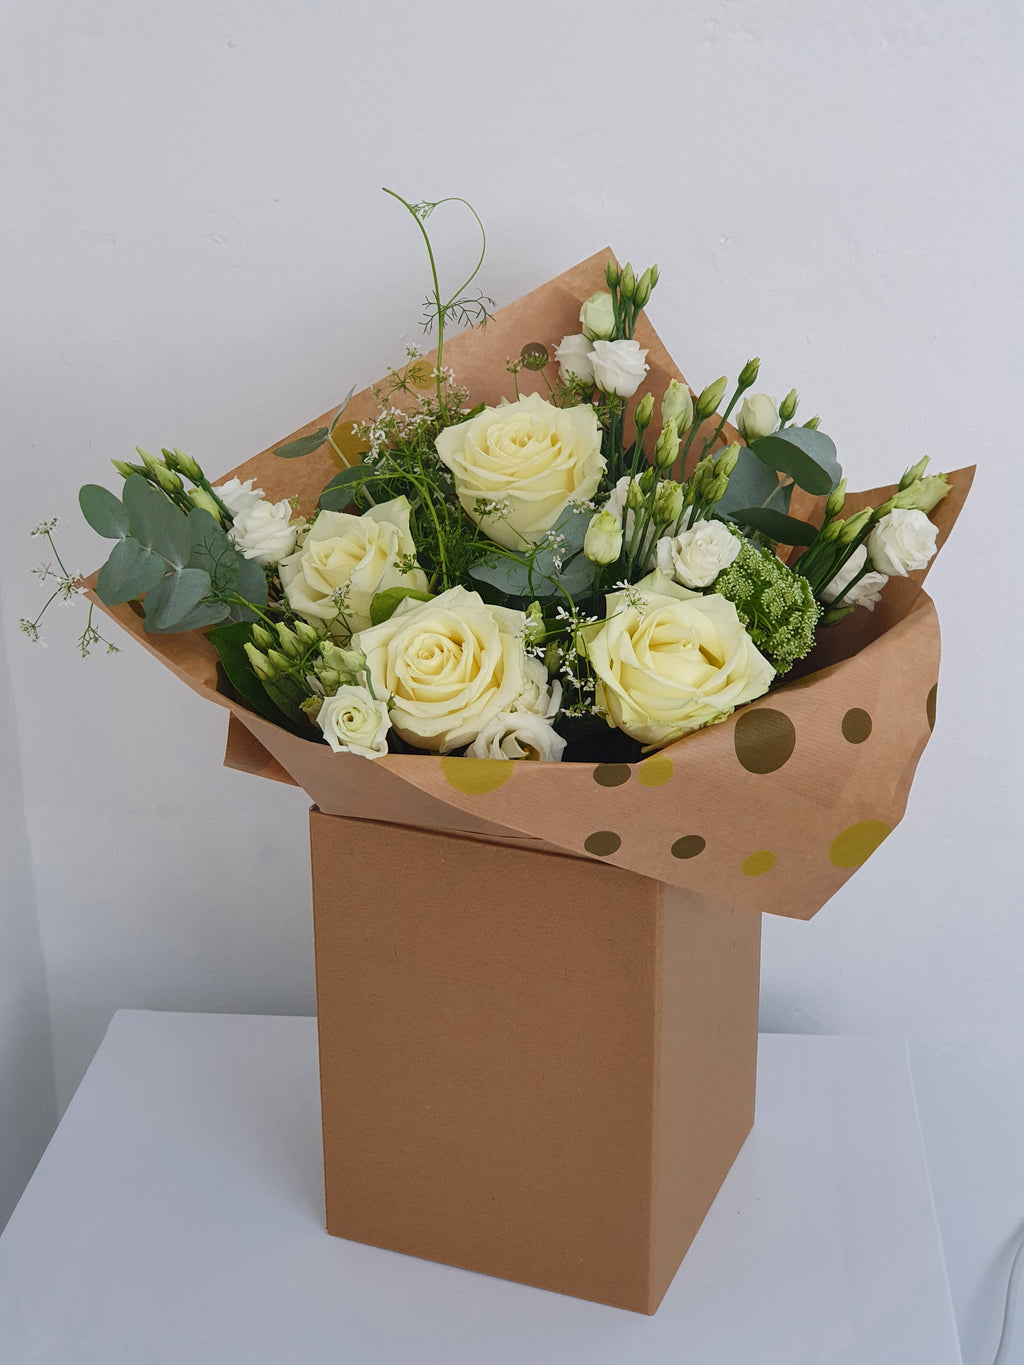 White roses and Lizzianthus